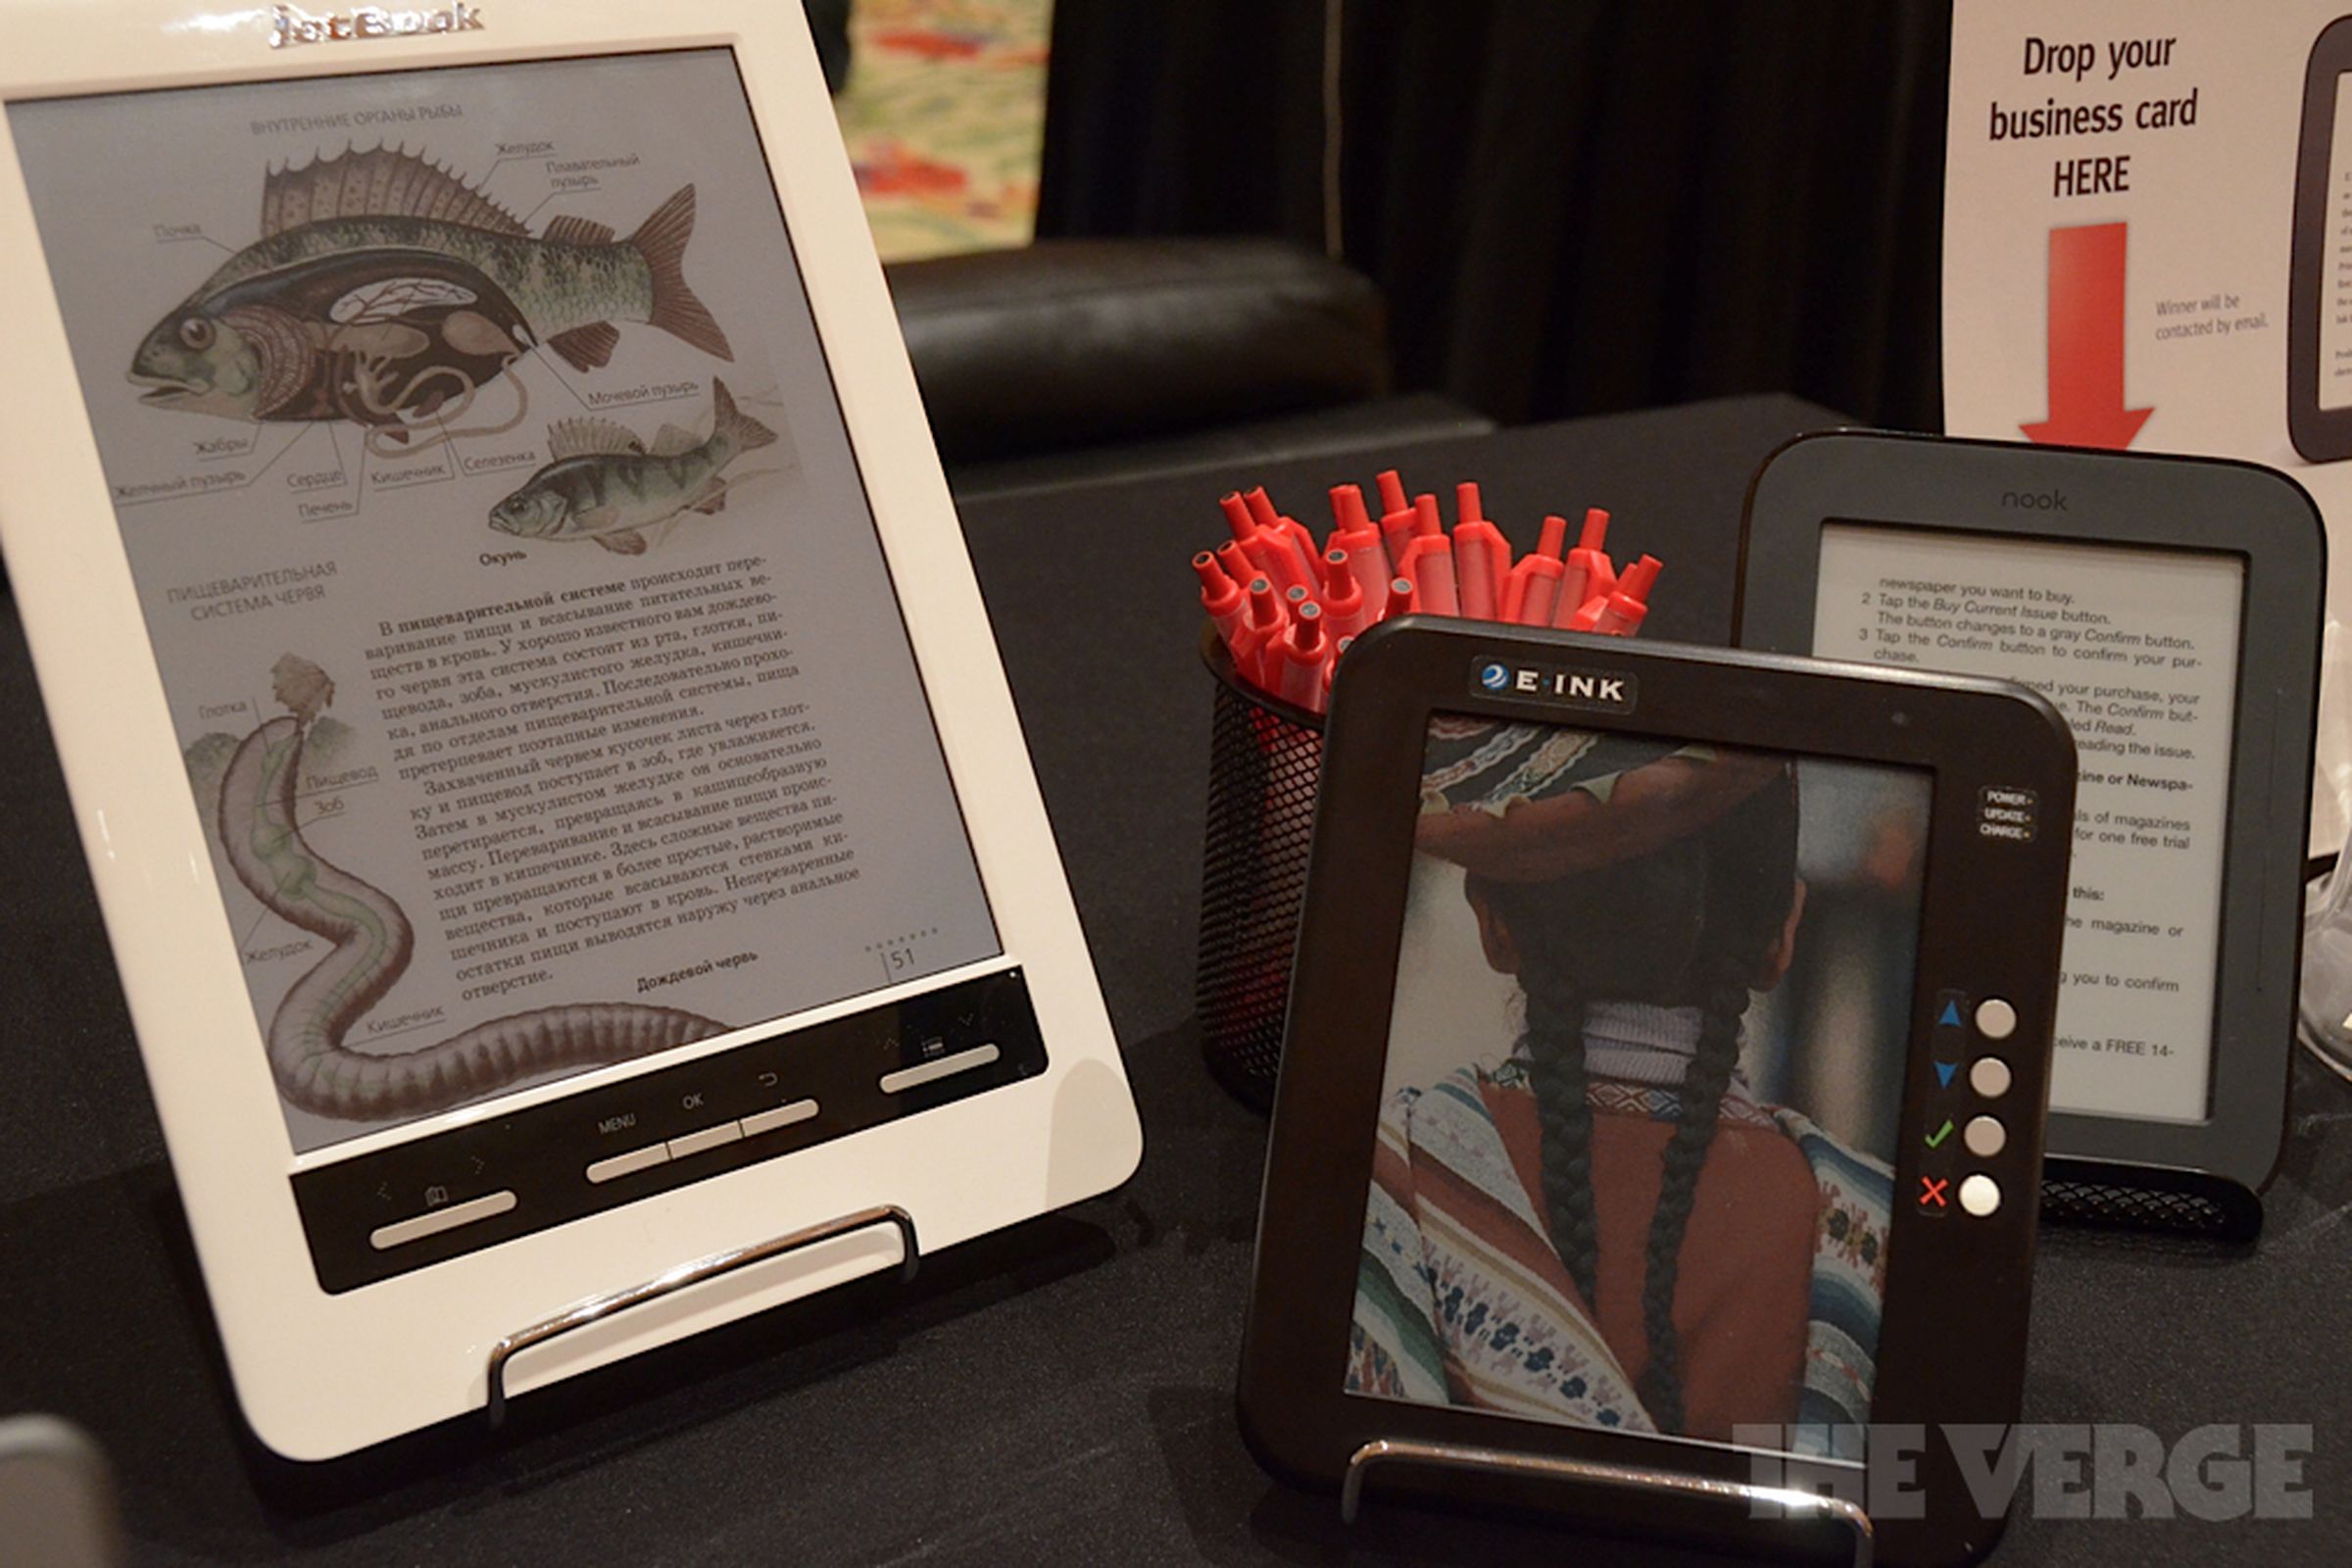 Gallery Photo: Ectaco Jetbook Color and E Ink prototypes hands-on pictures